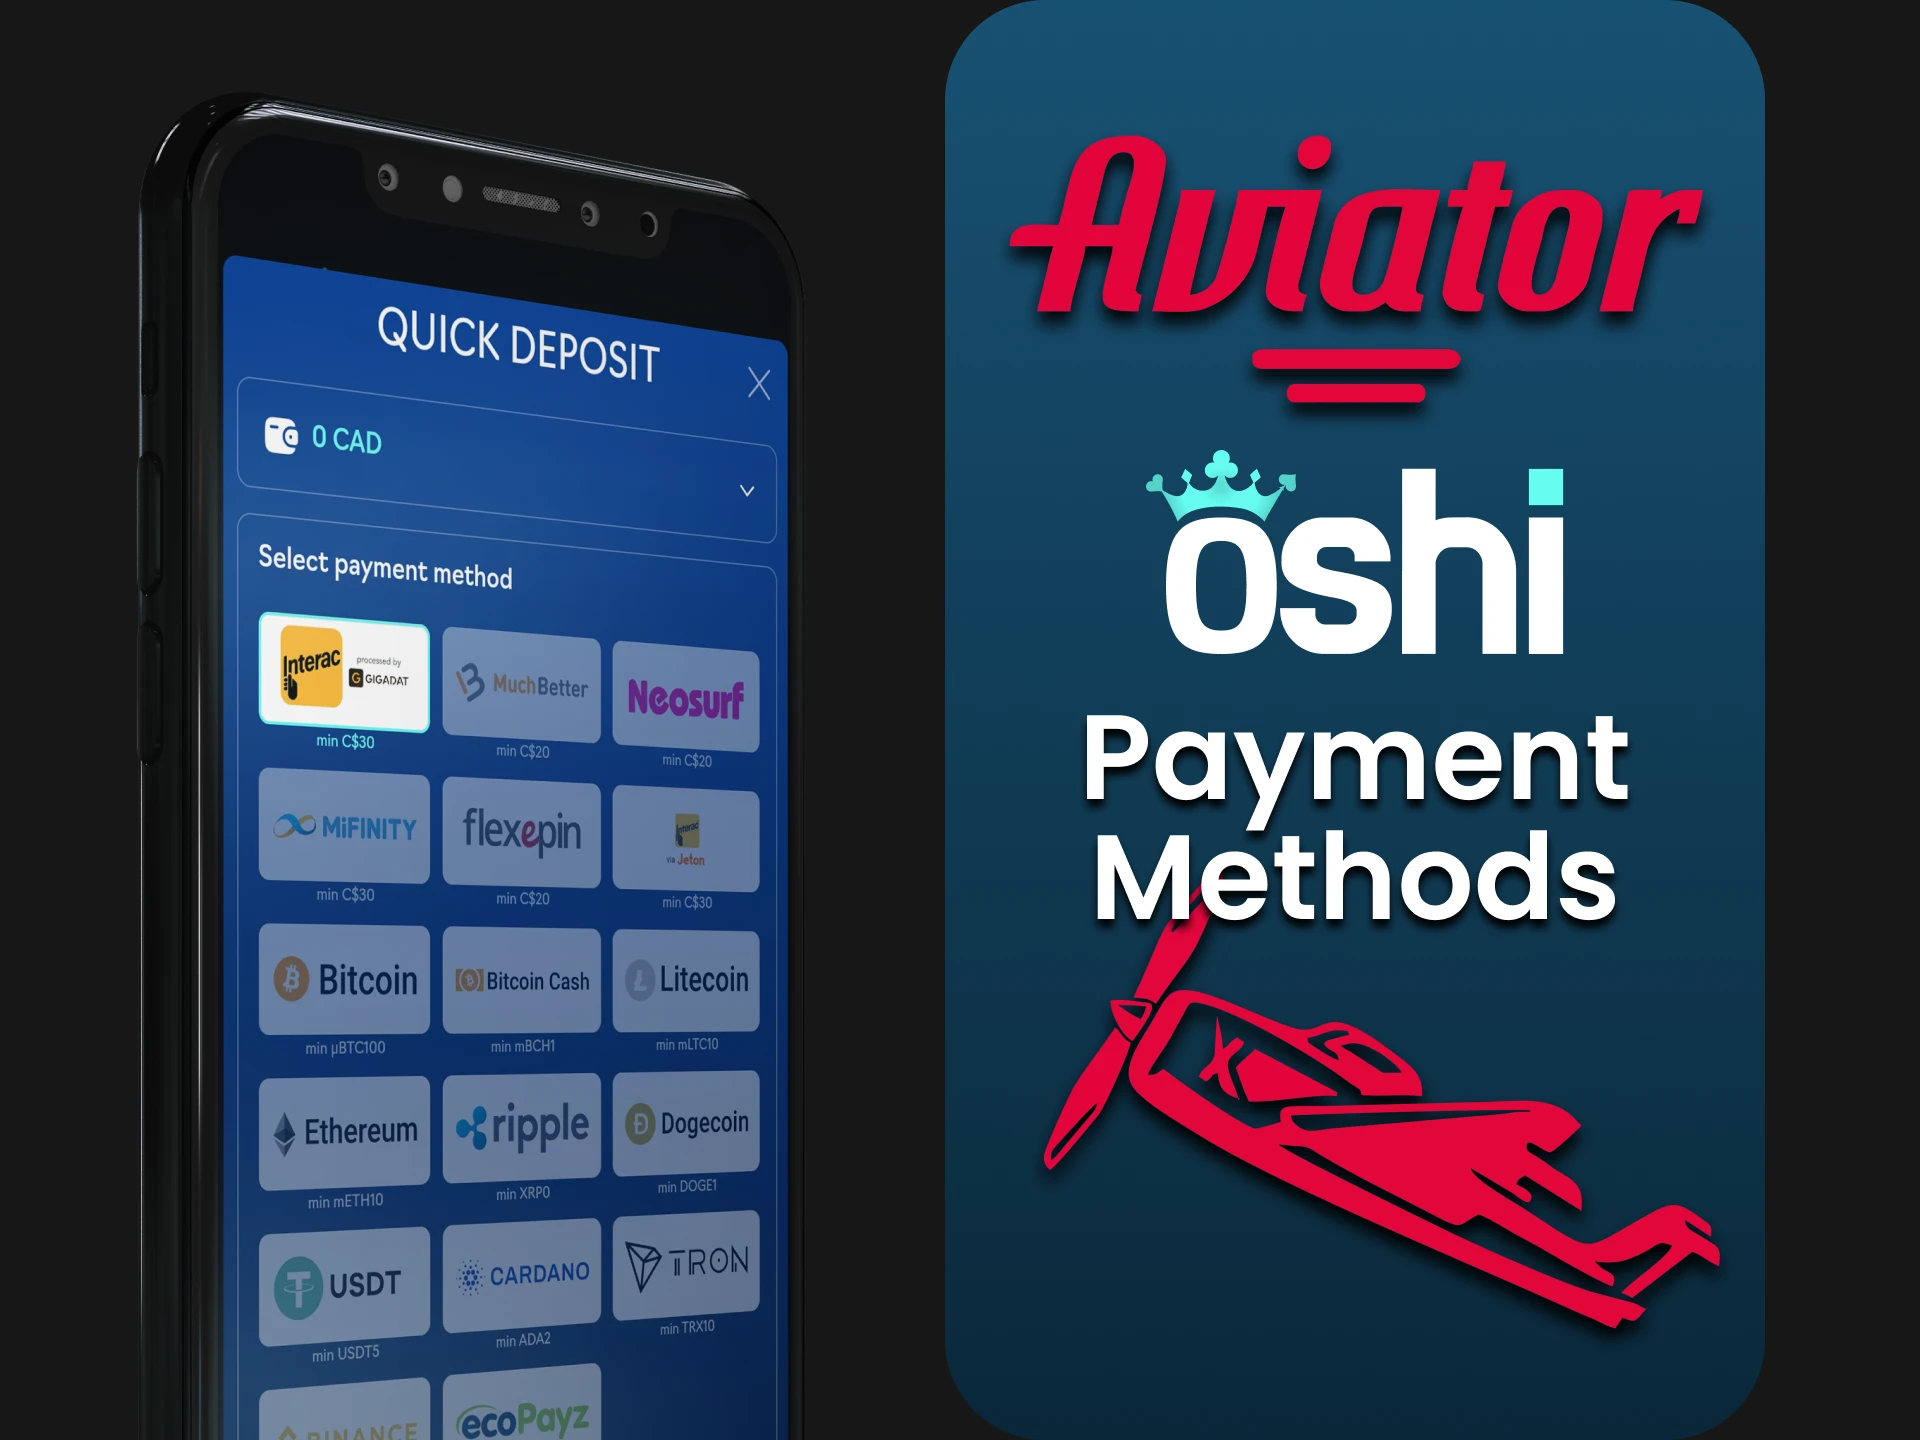 We will tell you about payment in the Oshi Casino application for Aviator.